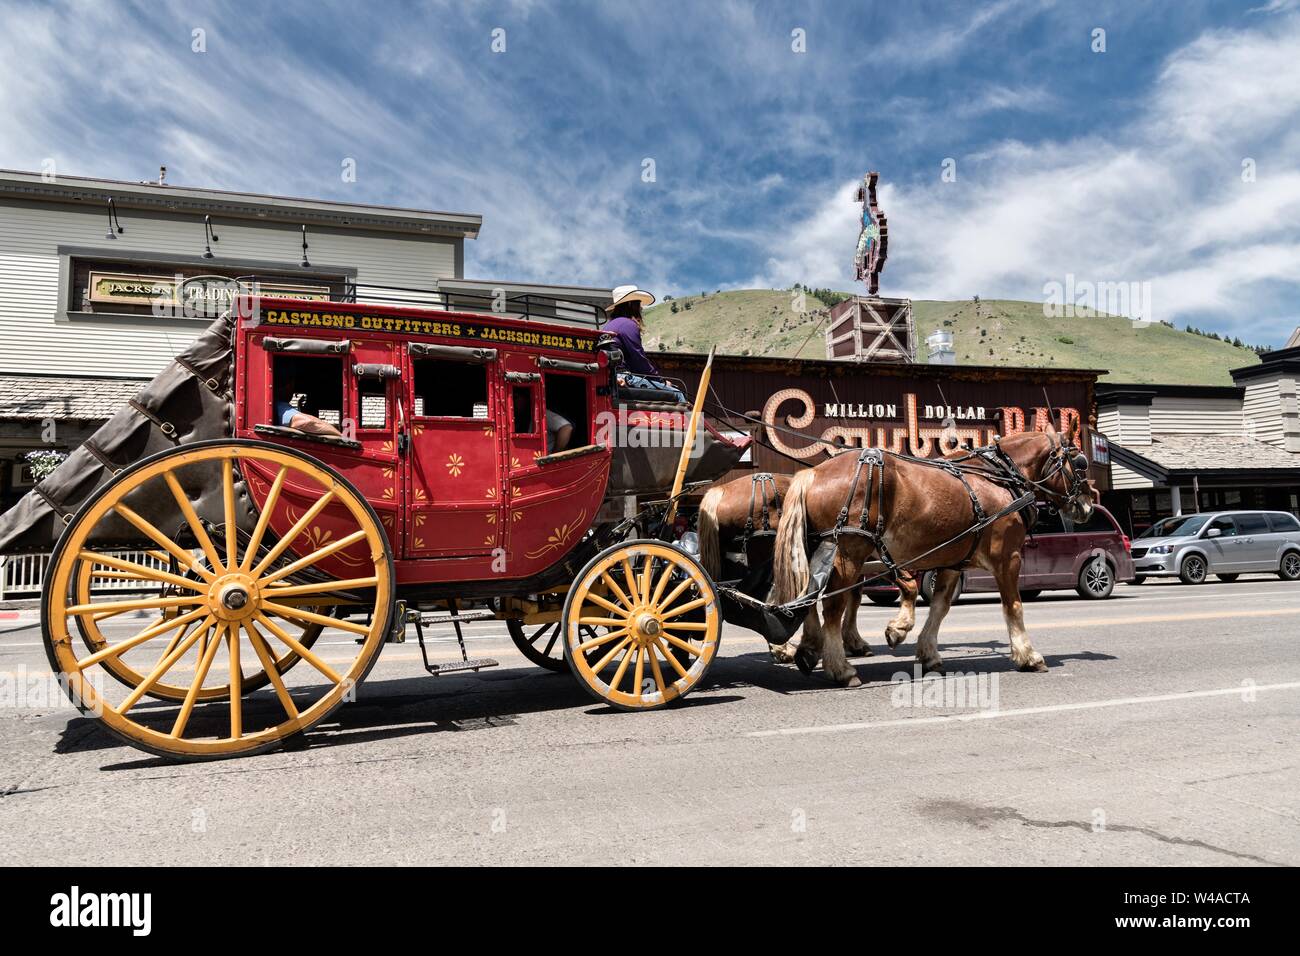 The Castagno Outfitters tourists stagecoach drives past the Million Dollar Cowboy Bar around the the Town Square in Jackson Hole, Wyoming. Stock Photo